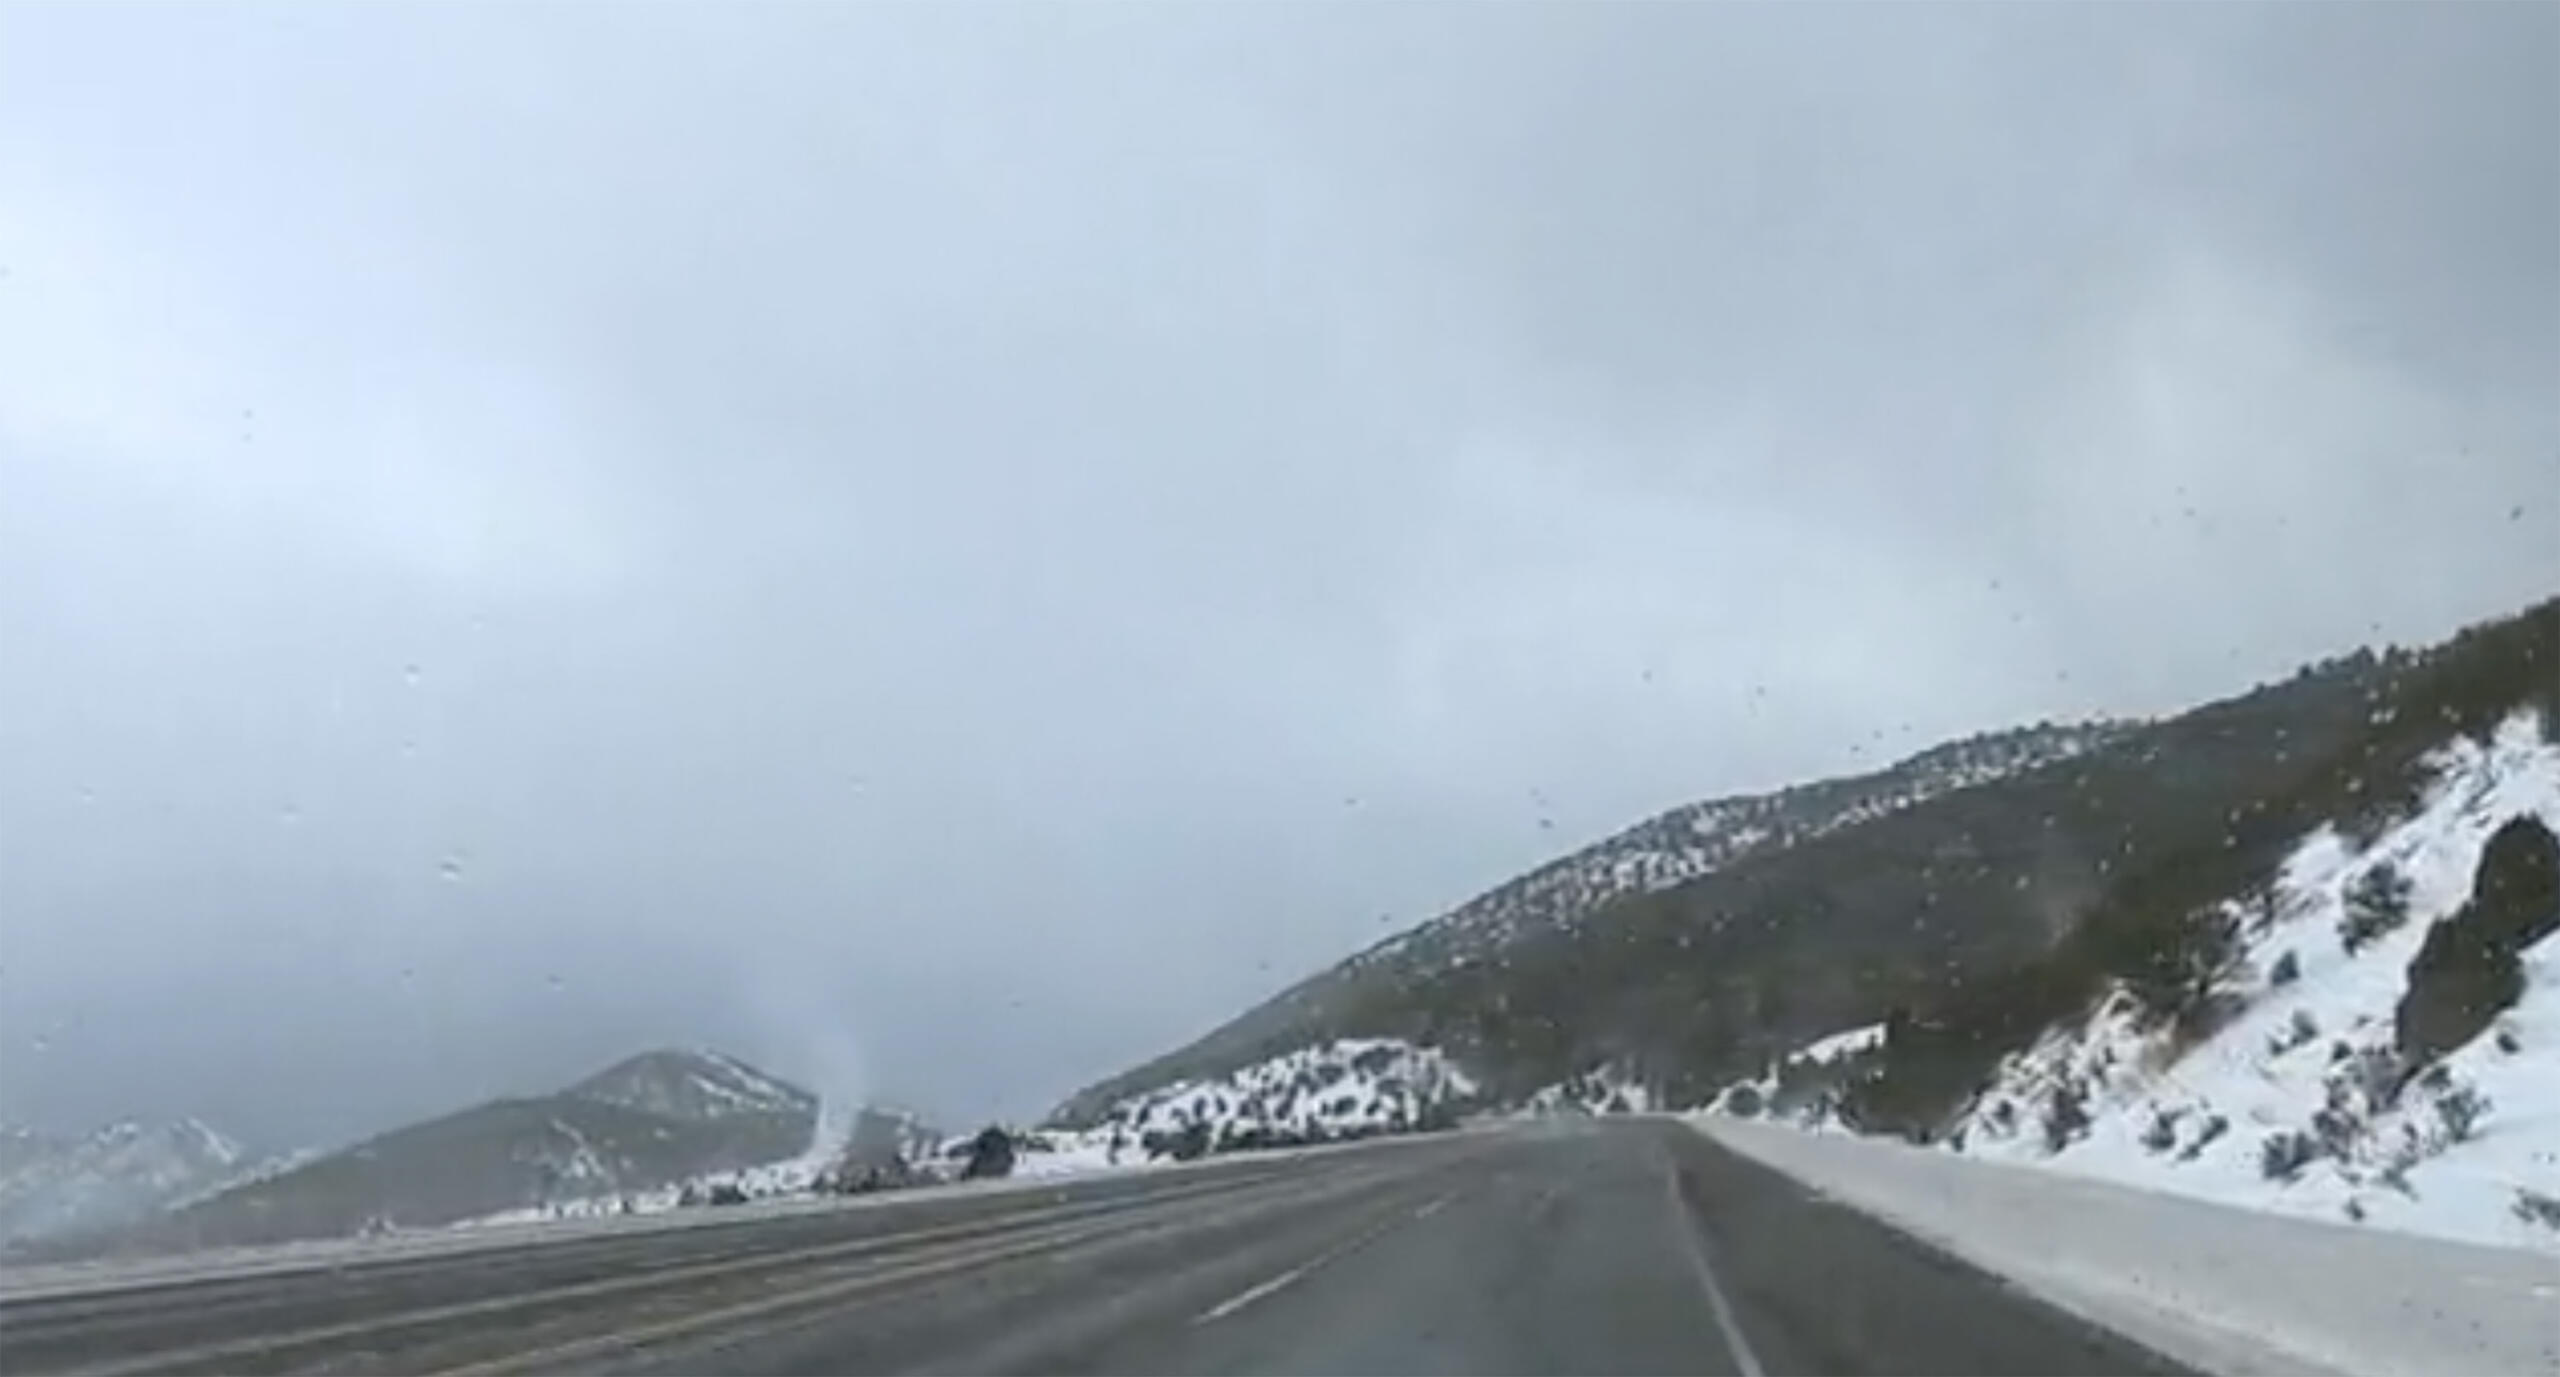 A rare weather phenomenon some are calling a "snowado" was recorded crossing a highway in southeastern Idaho.